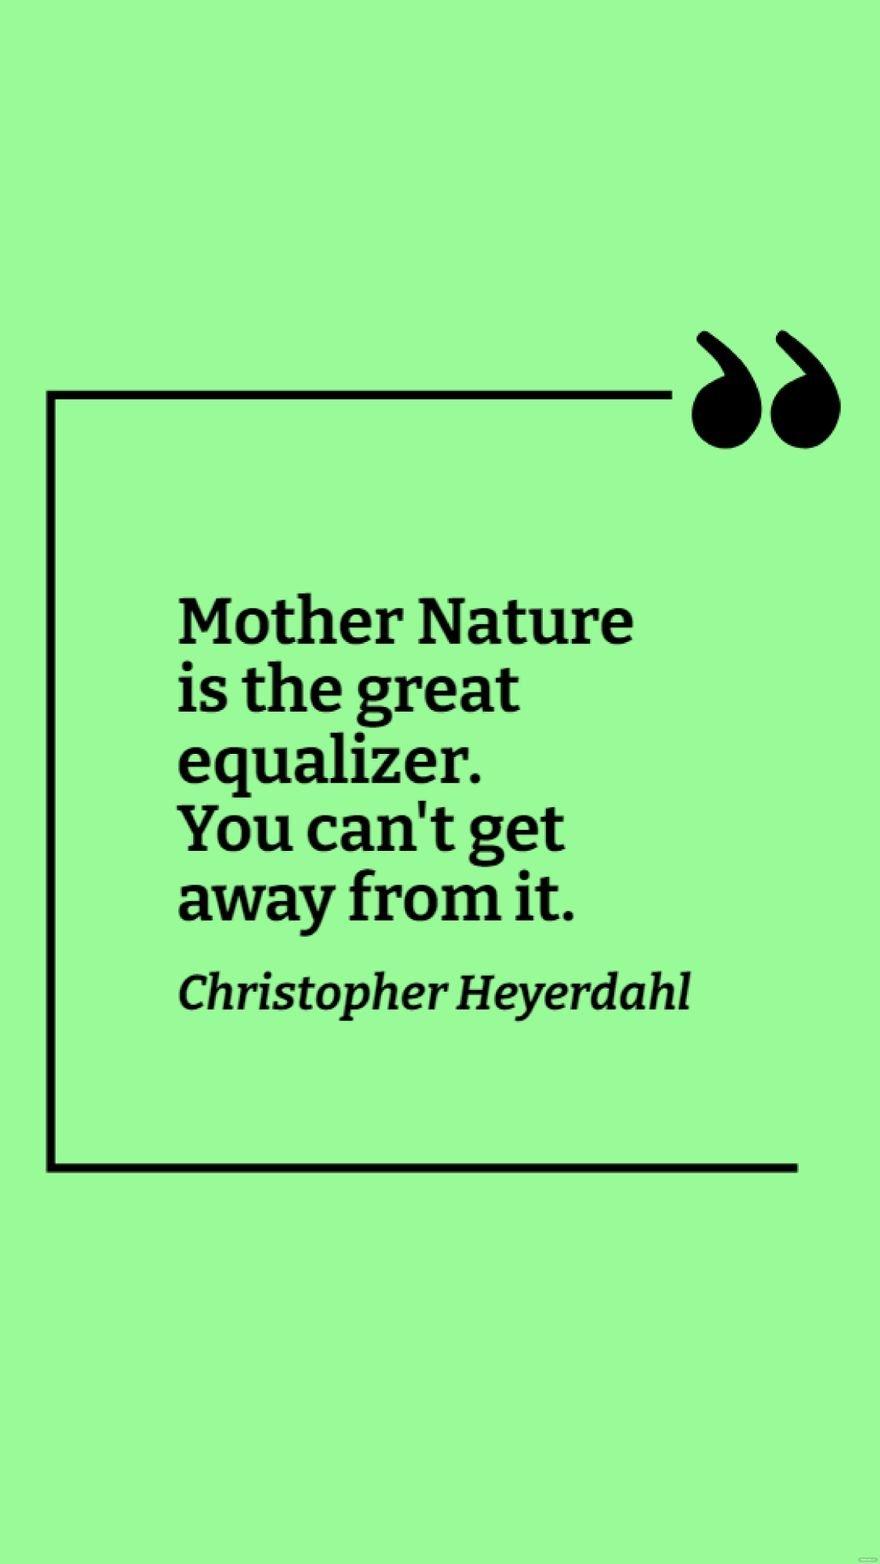 Free Christopher Heyerdahl - Mother Nature is the great equalizer. You can't get away from it. in JPG